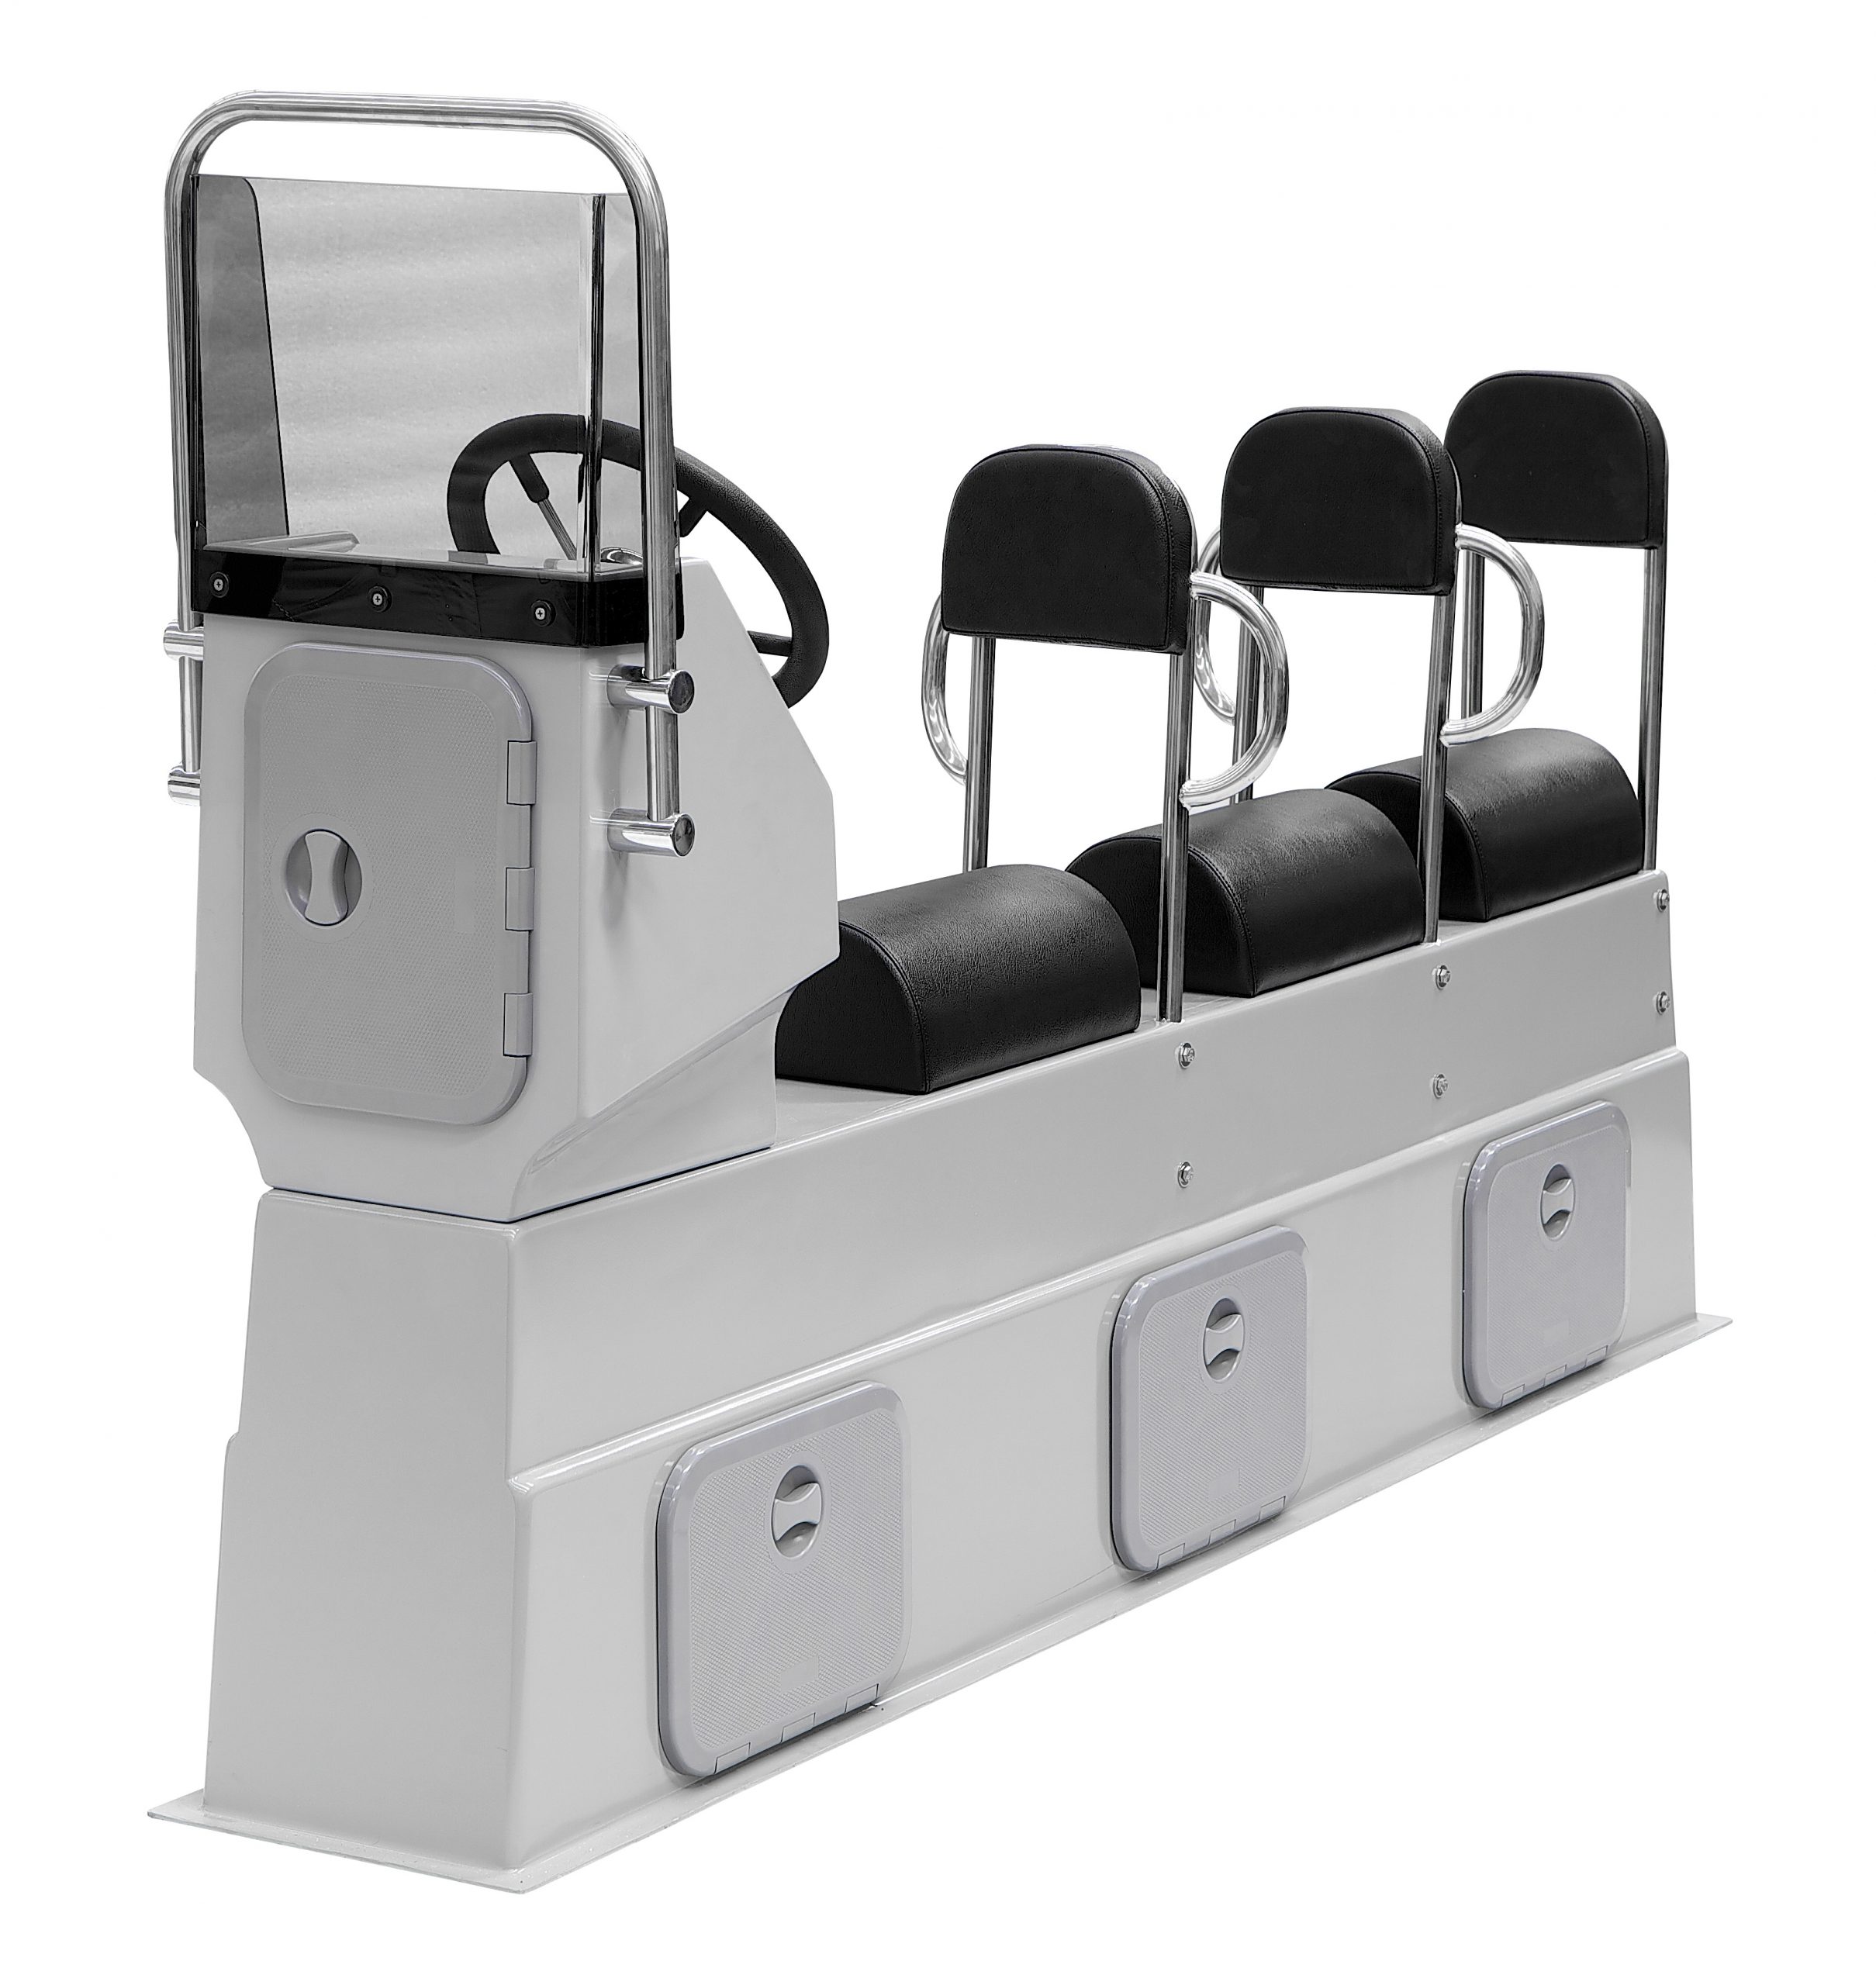 Modular Seat Five Persons